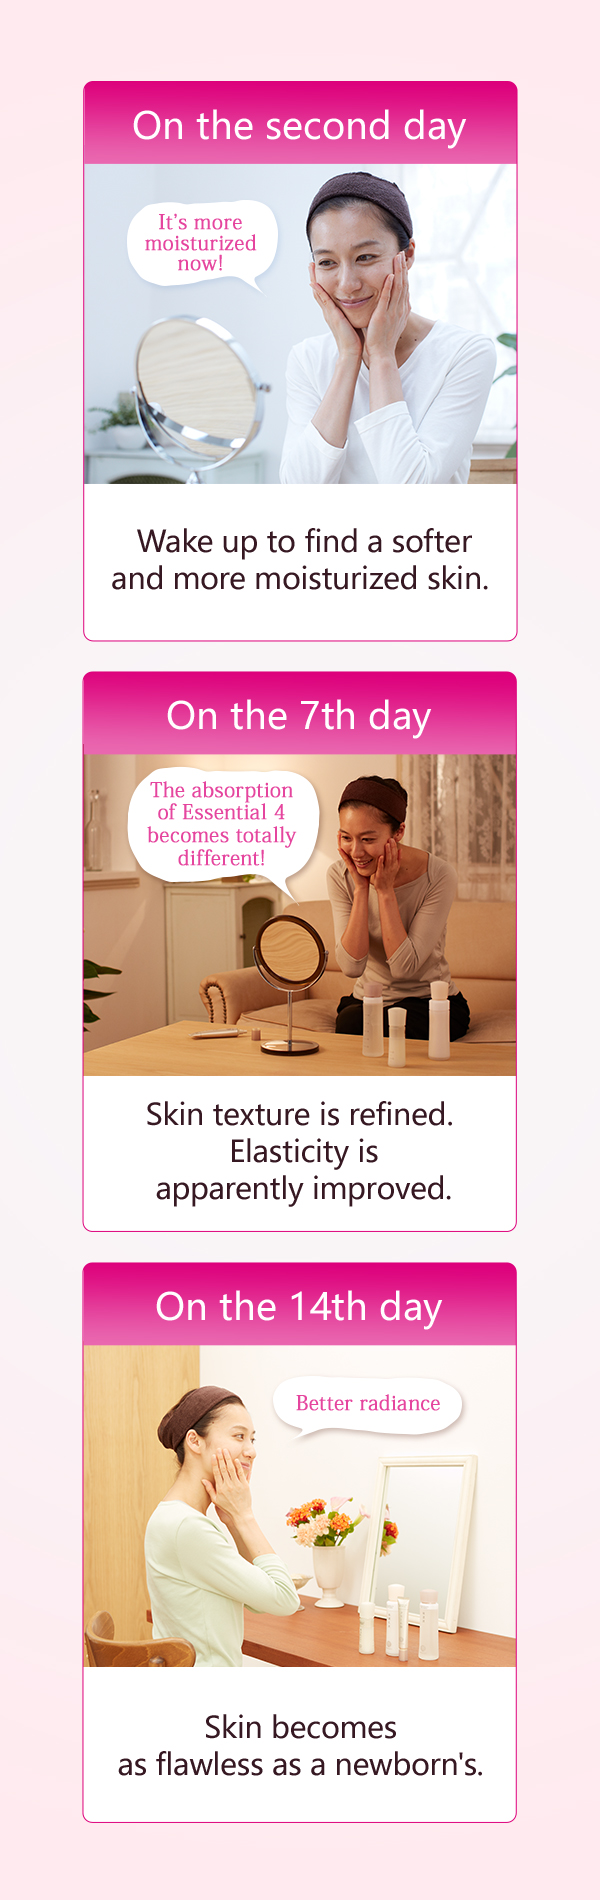 On the second day Wake up to find a softer and more moisturized skin. On the 7th day Skin texture is refined. Elasticity is apparently improved. On the 14th day Skin becomes as flawless as a newborn's.